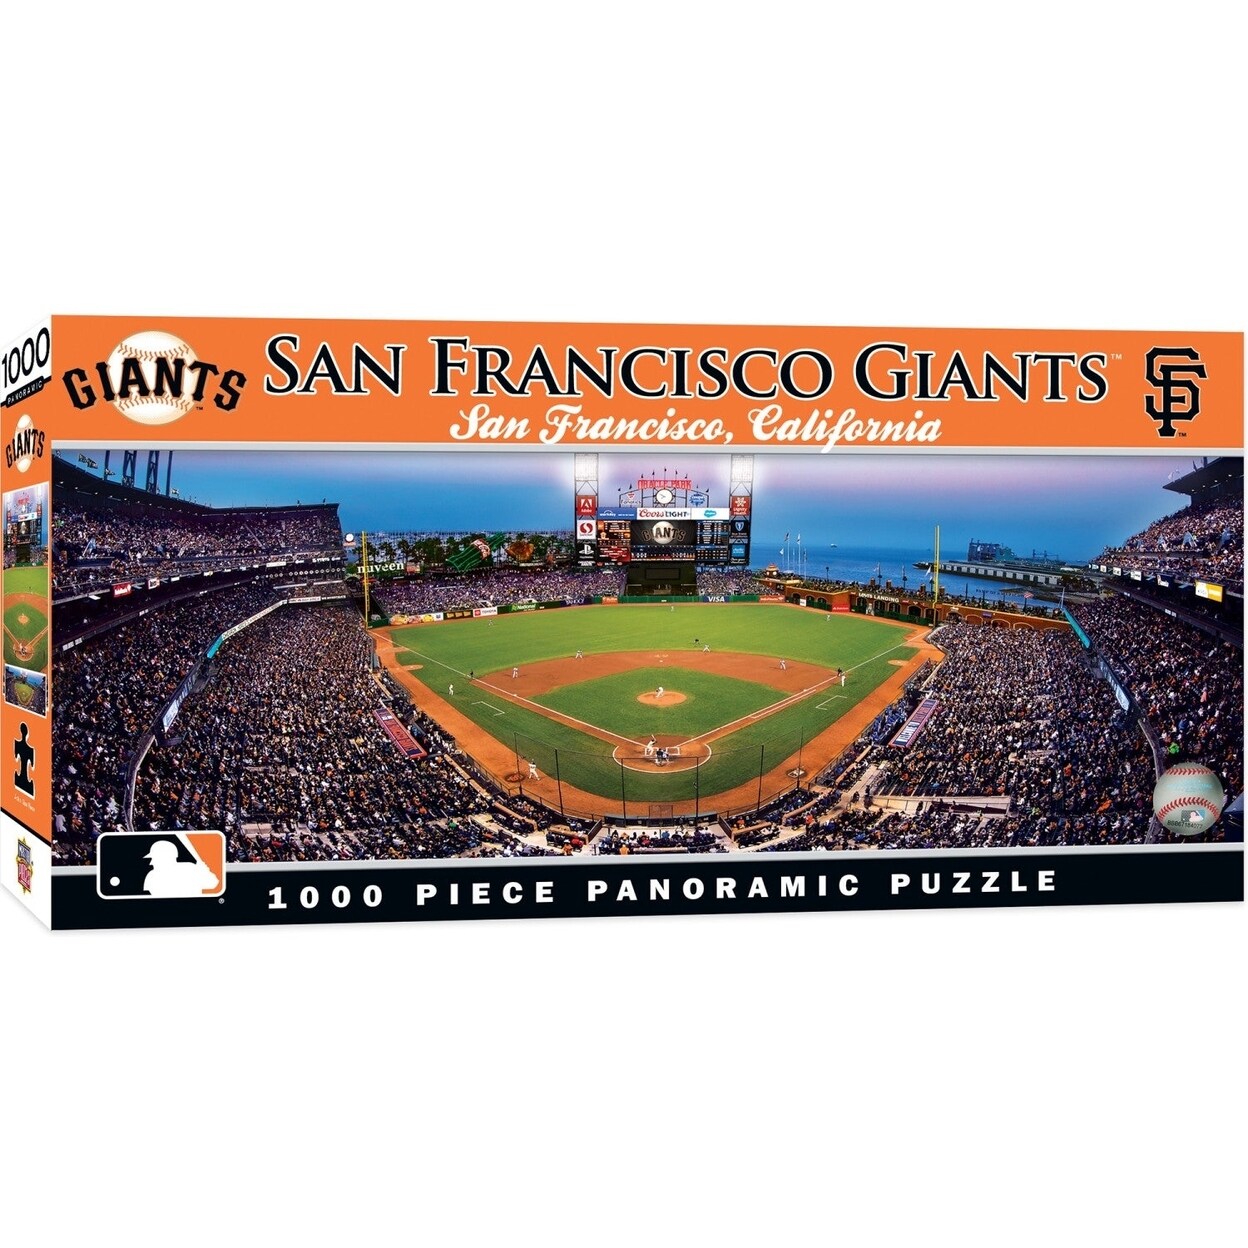 MasterPieces San Francisco Giants - 1000 Piece Panoramic Jigsaw Puzzle